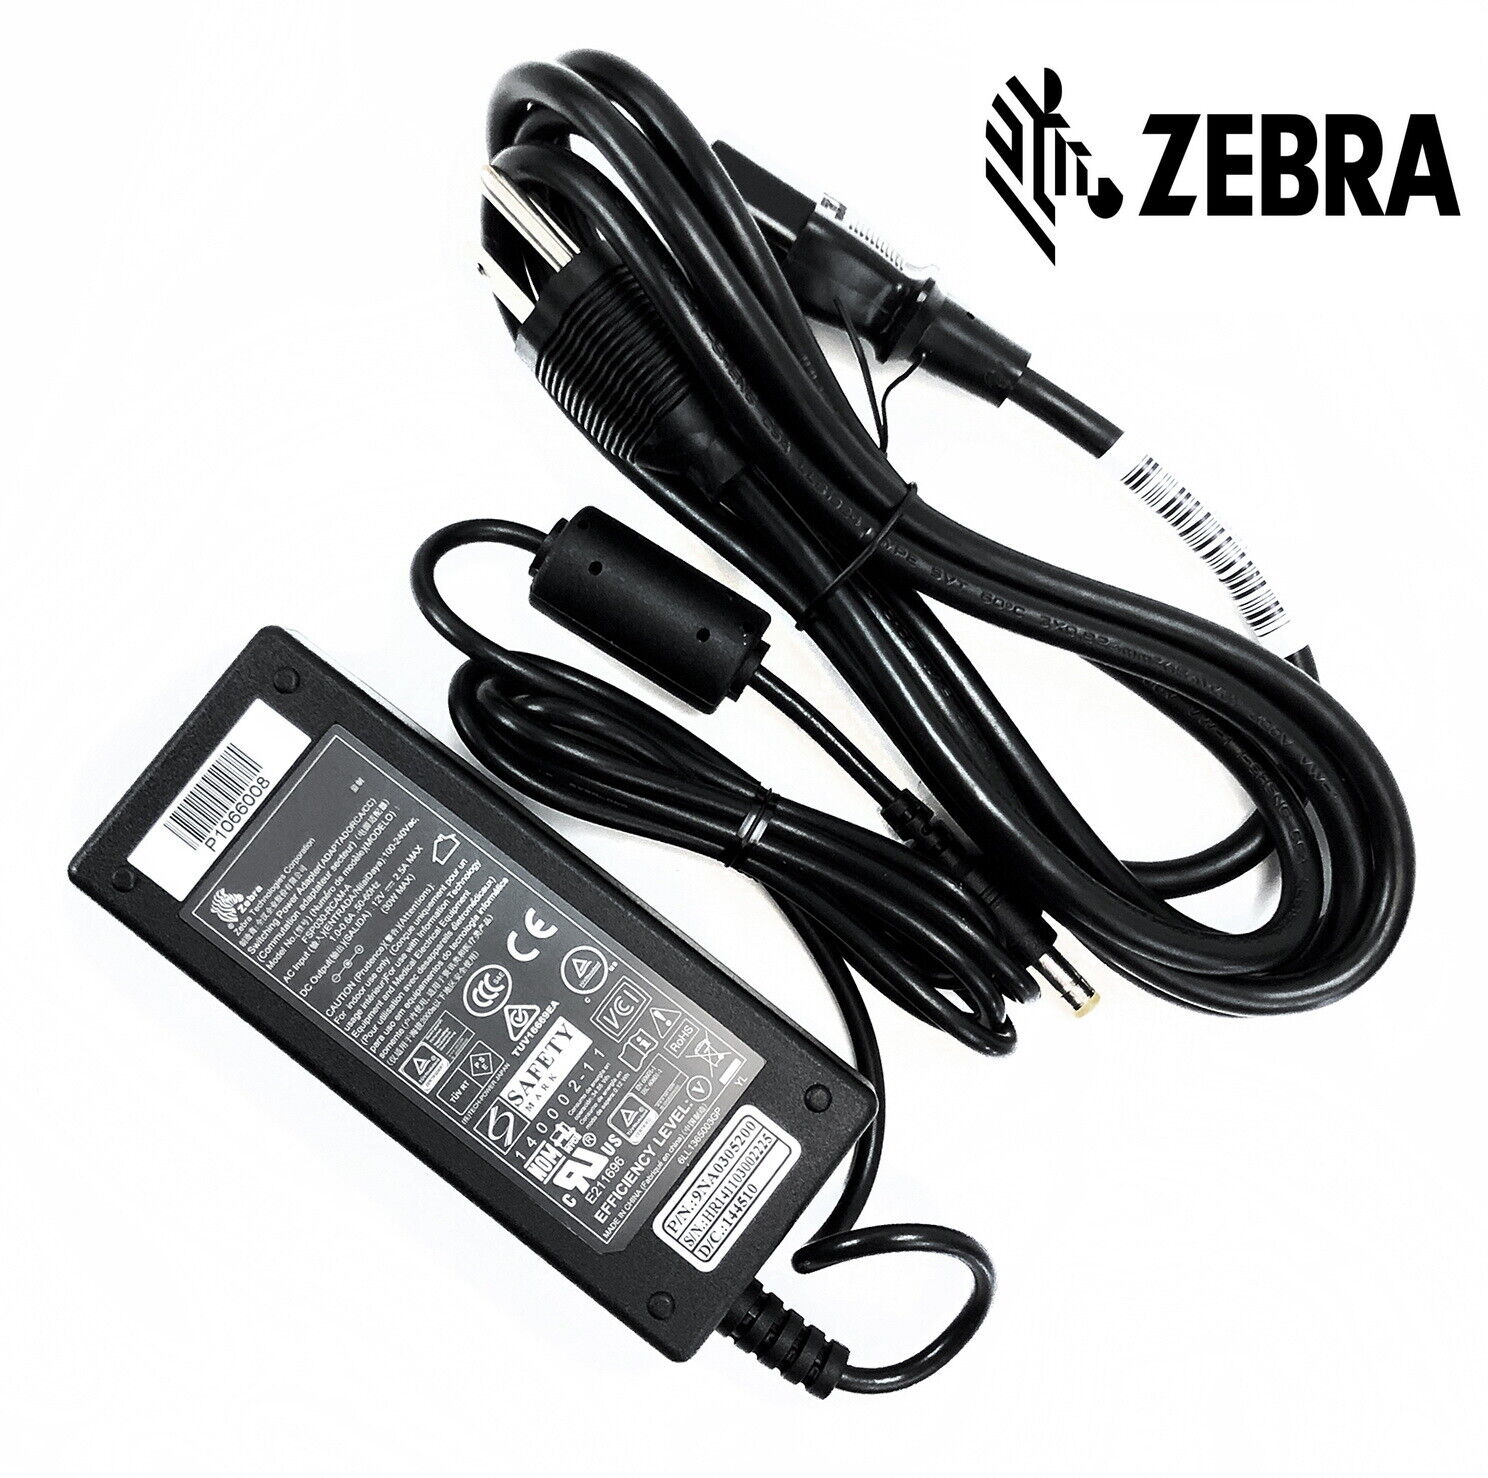 *Brand NEW*OEM Zebra Healthcare AC Adapter Charger for ZQ510 ZQ520 Printers W/P.Cord